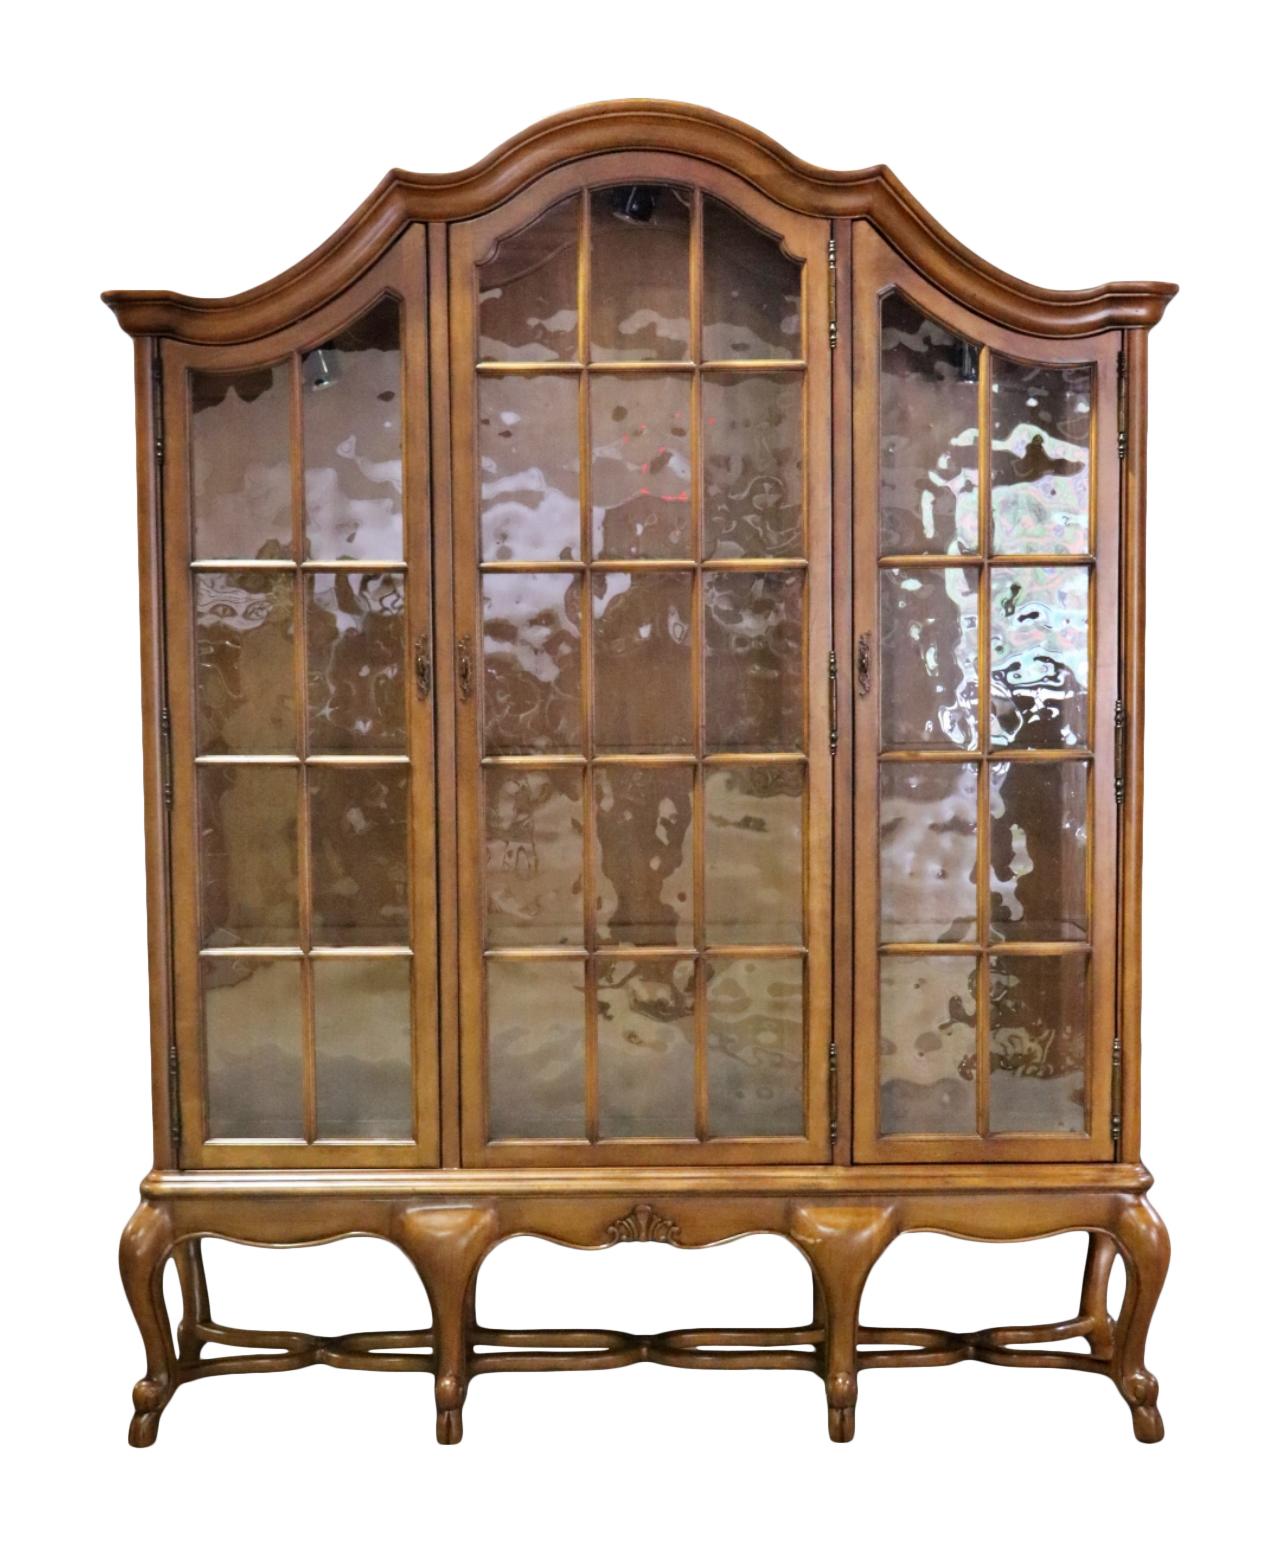 3 doors with antique wavy glass style panels. 9 glass shelves. 92